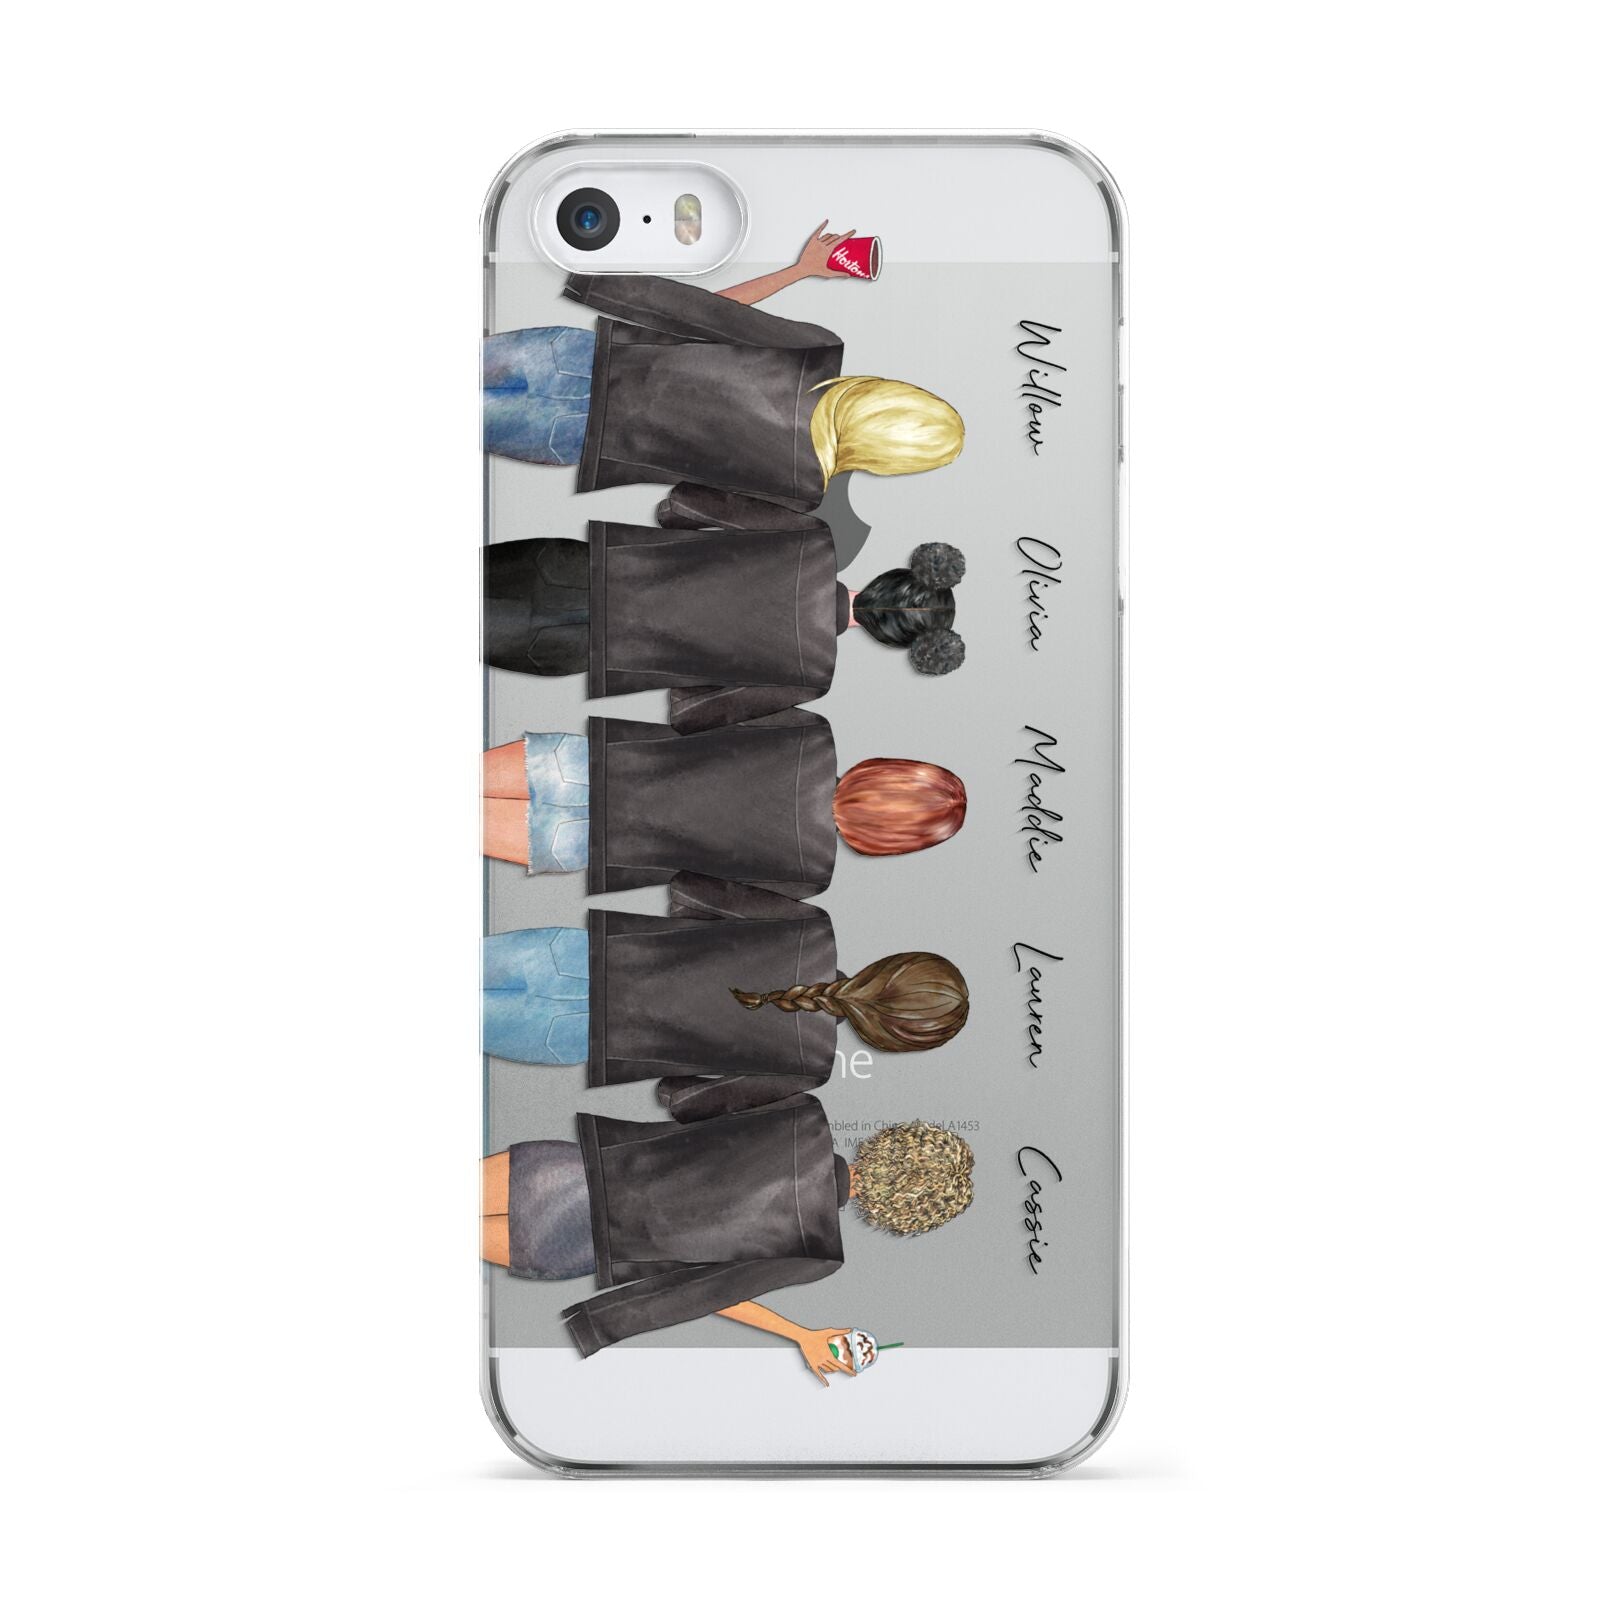 5 Best Friends with Names Apple iPhone 5 Case